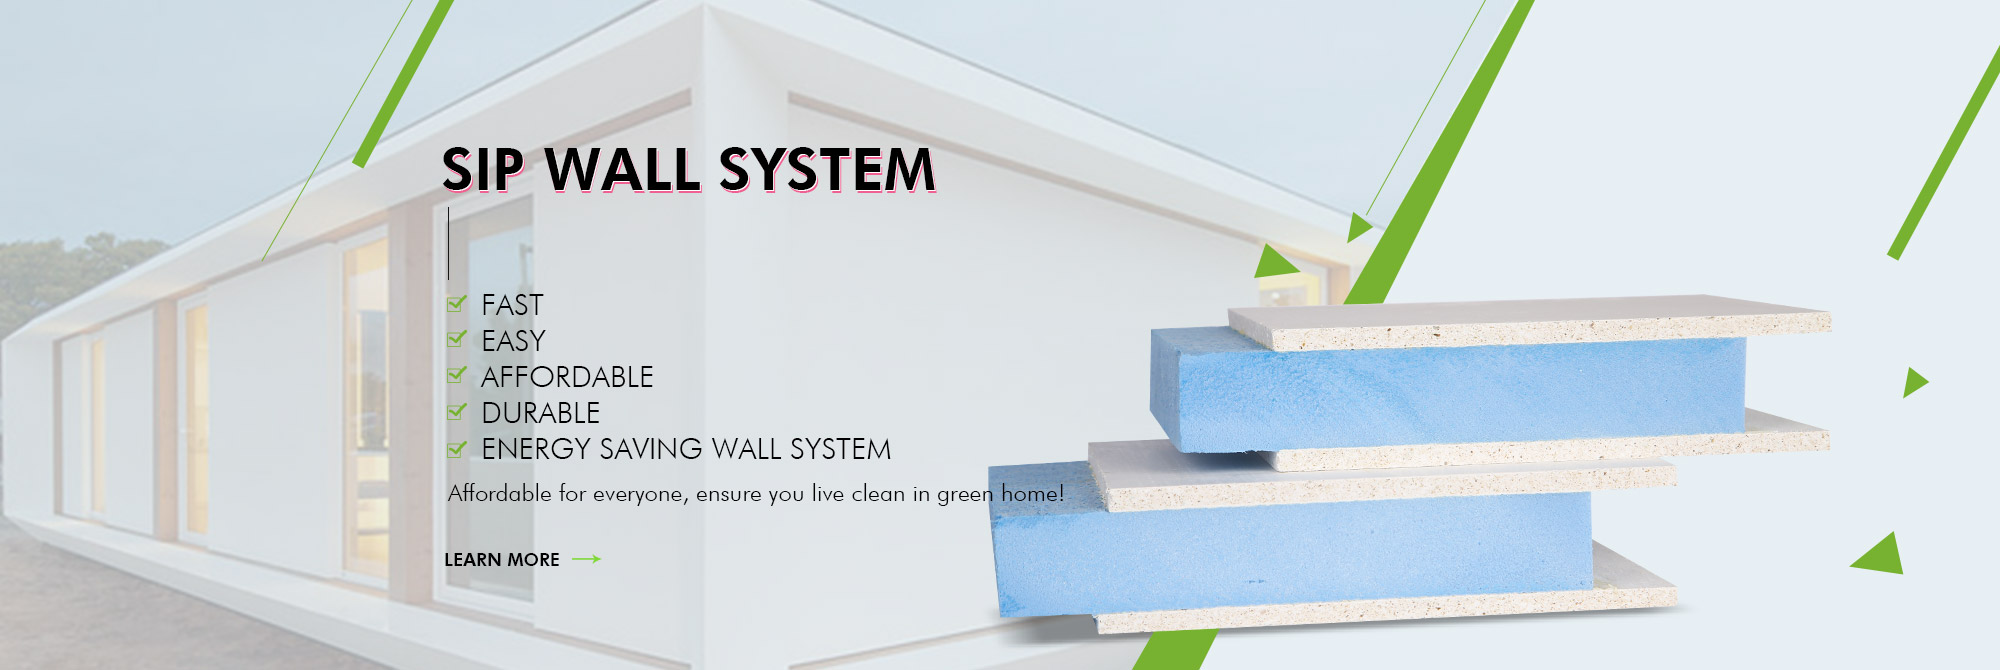 Acoustic Wall Mgo board direct sales